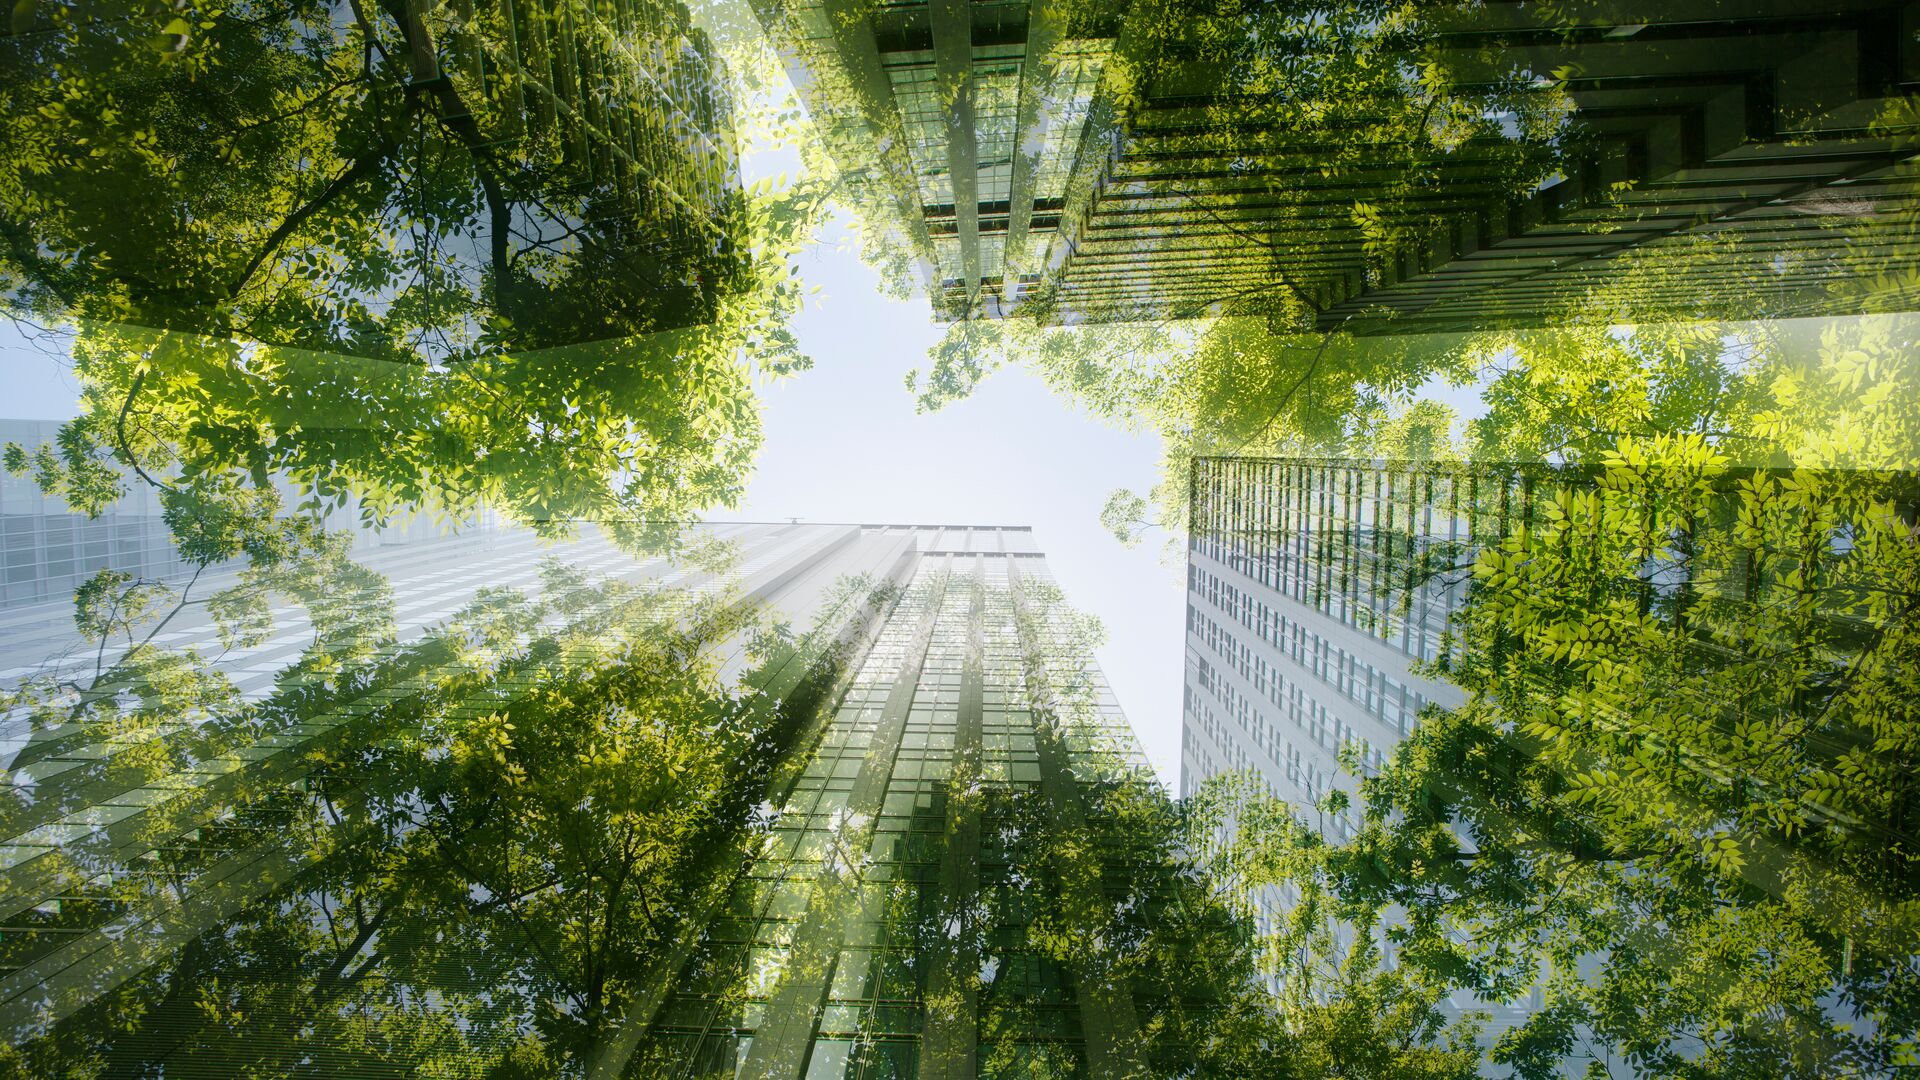 A shot lookjing up at buildings which are overlaid with reflective images of greenery plants and trees, representing ESG and sustainability research at TDCowen.